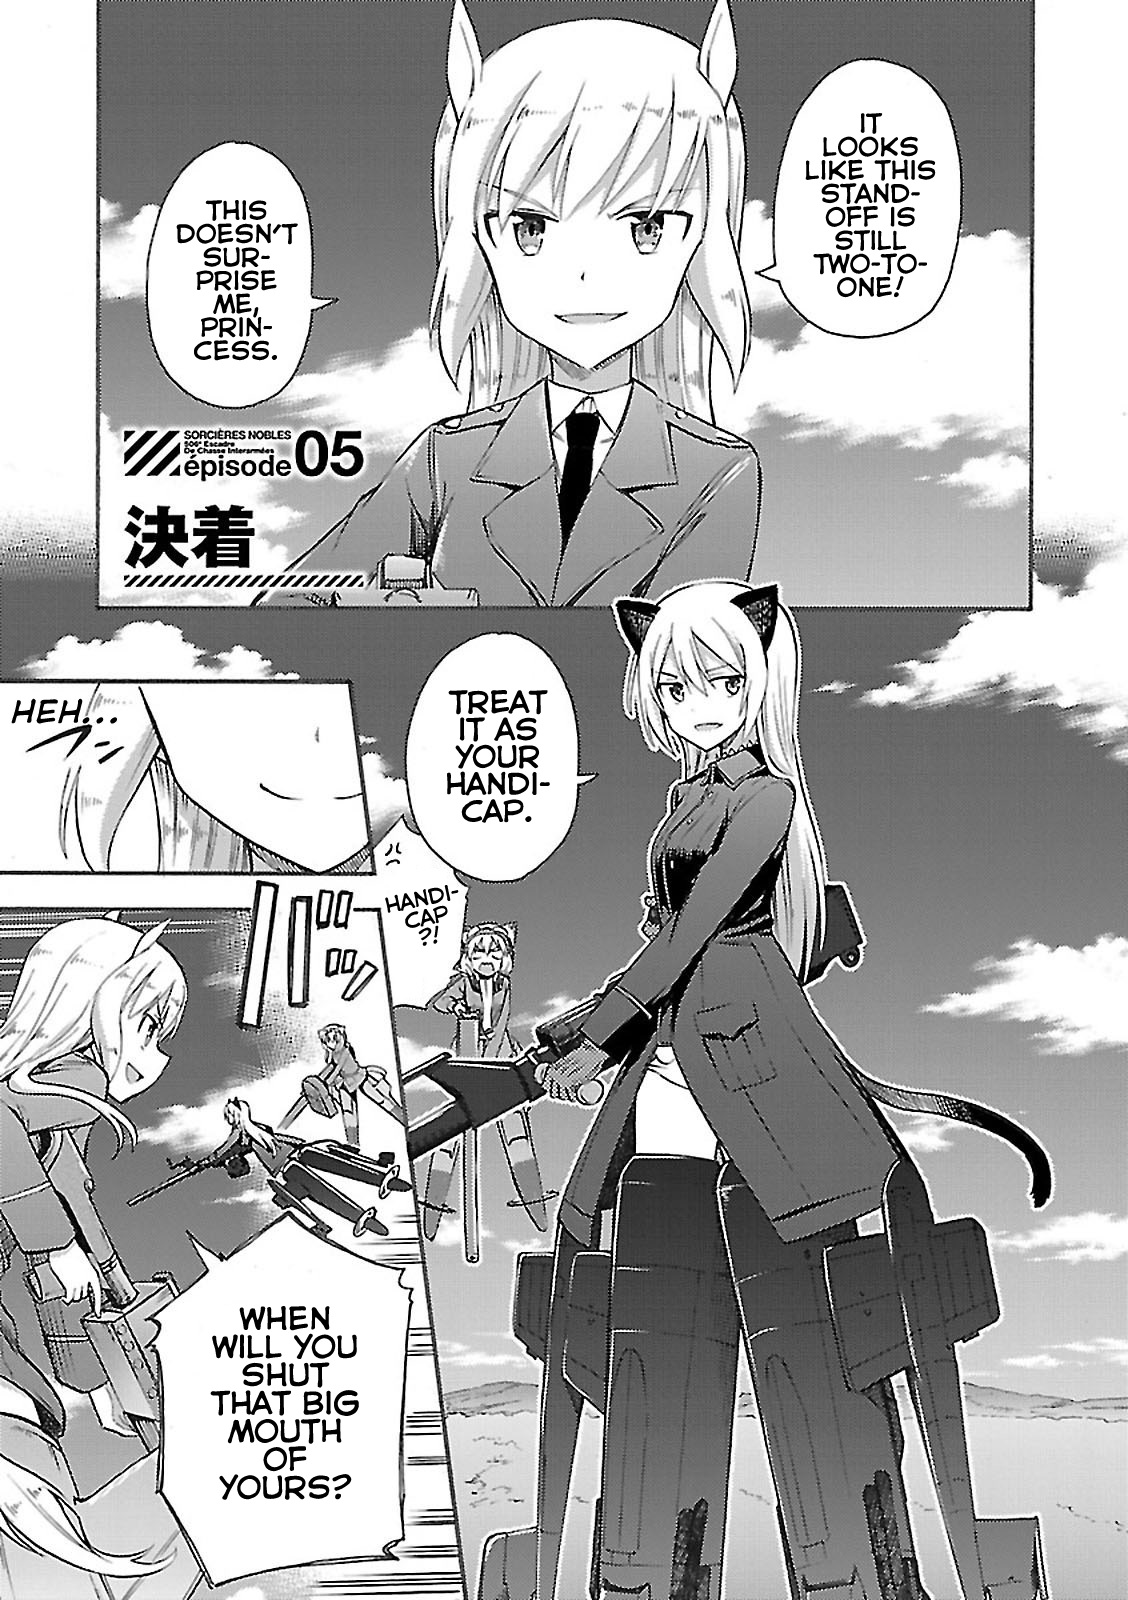 Noble Witches 506th Joint Fighter Wing Vol. 1 Ch. 5